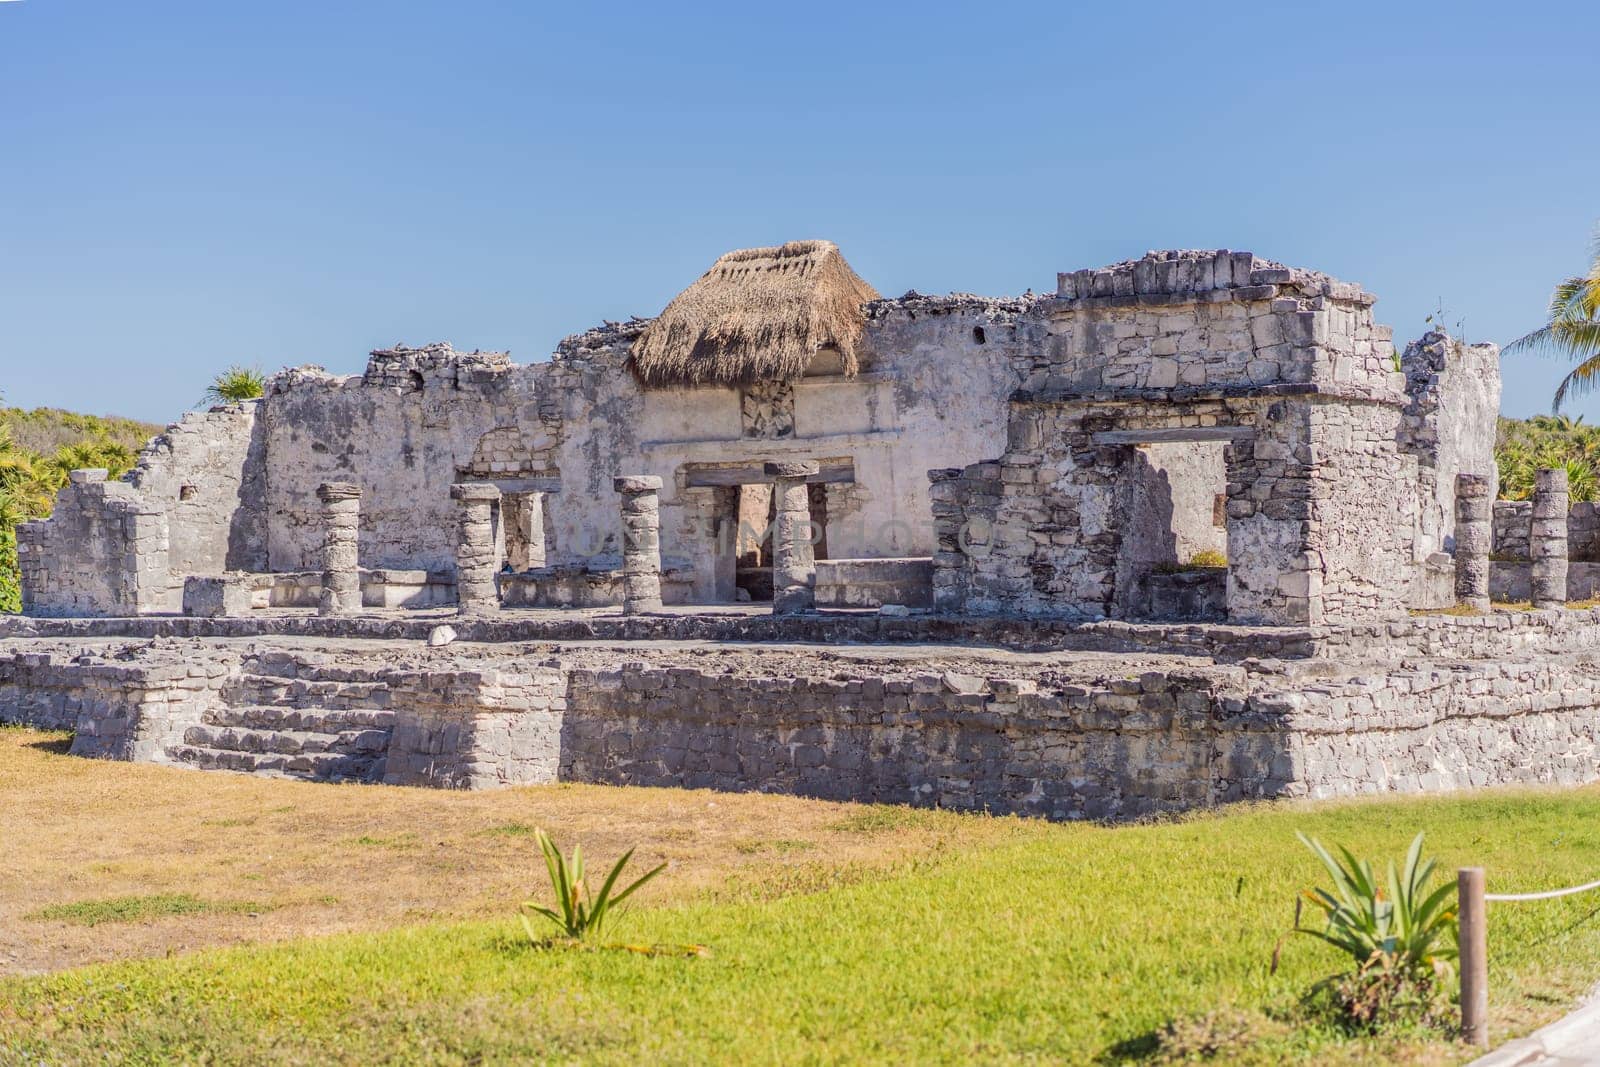 Beautiful archaeological site of the Mayan culture in Tulum, Mexico.